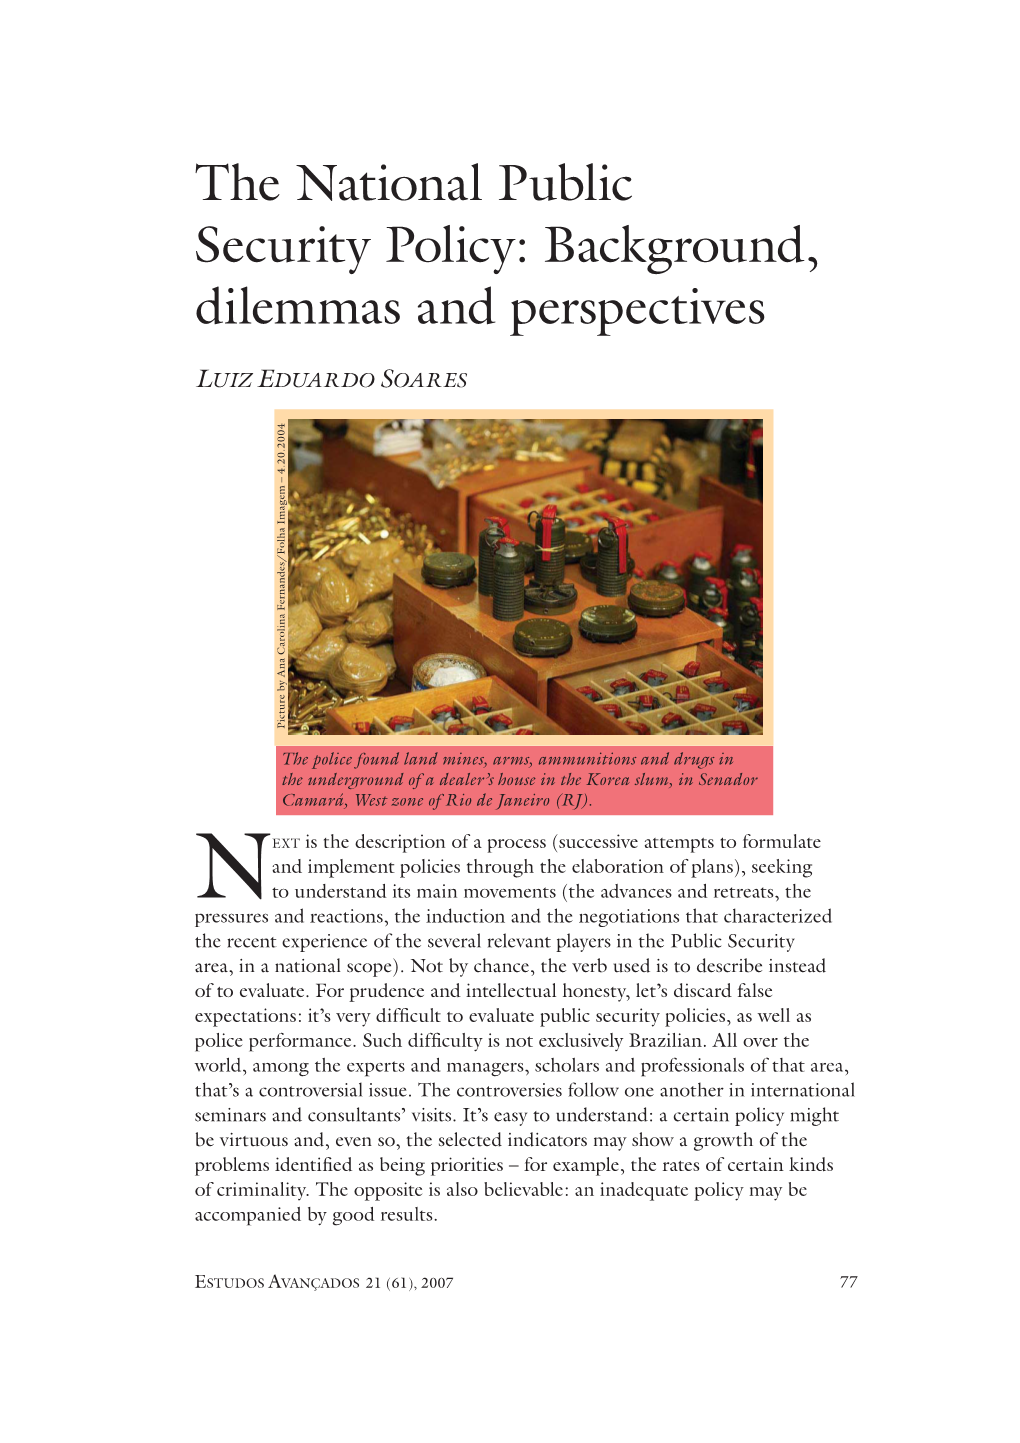 The National Public Security Policy: Background, Dilemmas and Perspectives